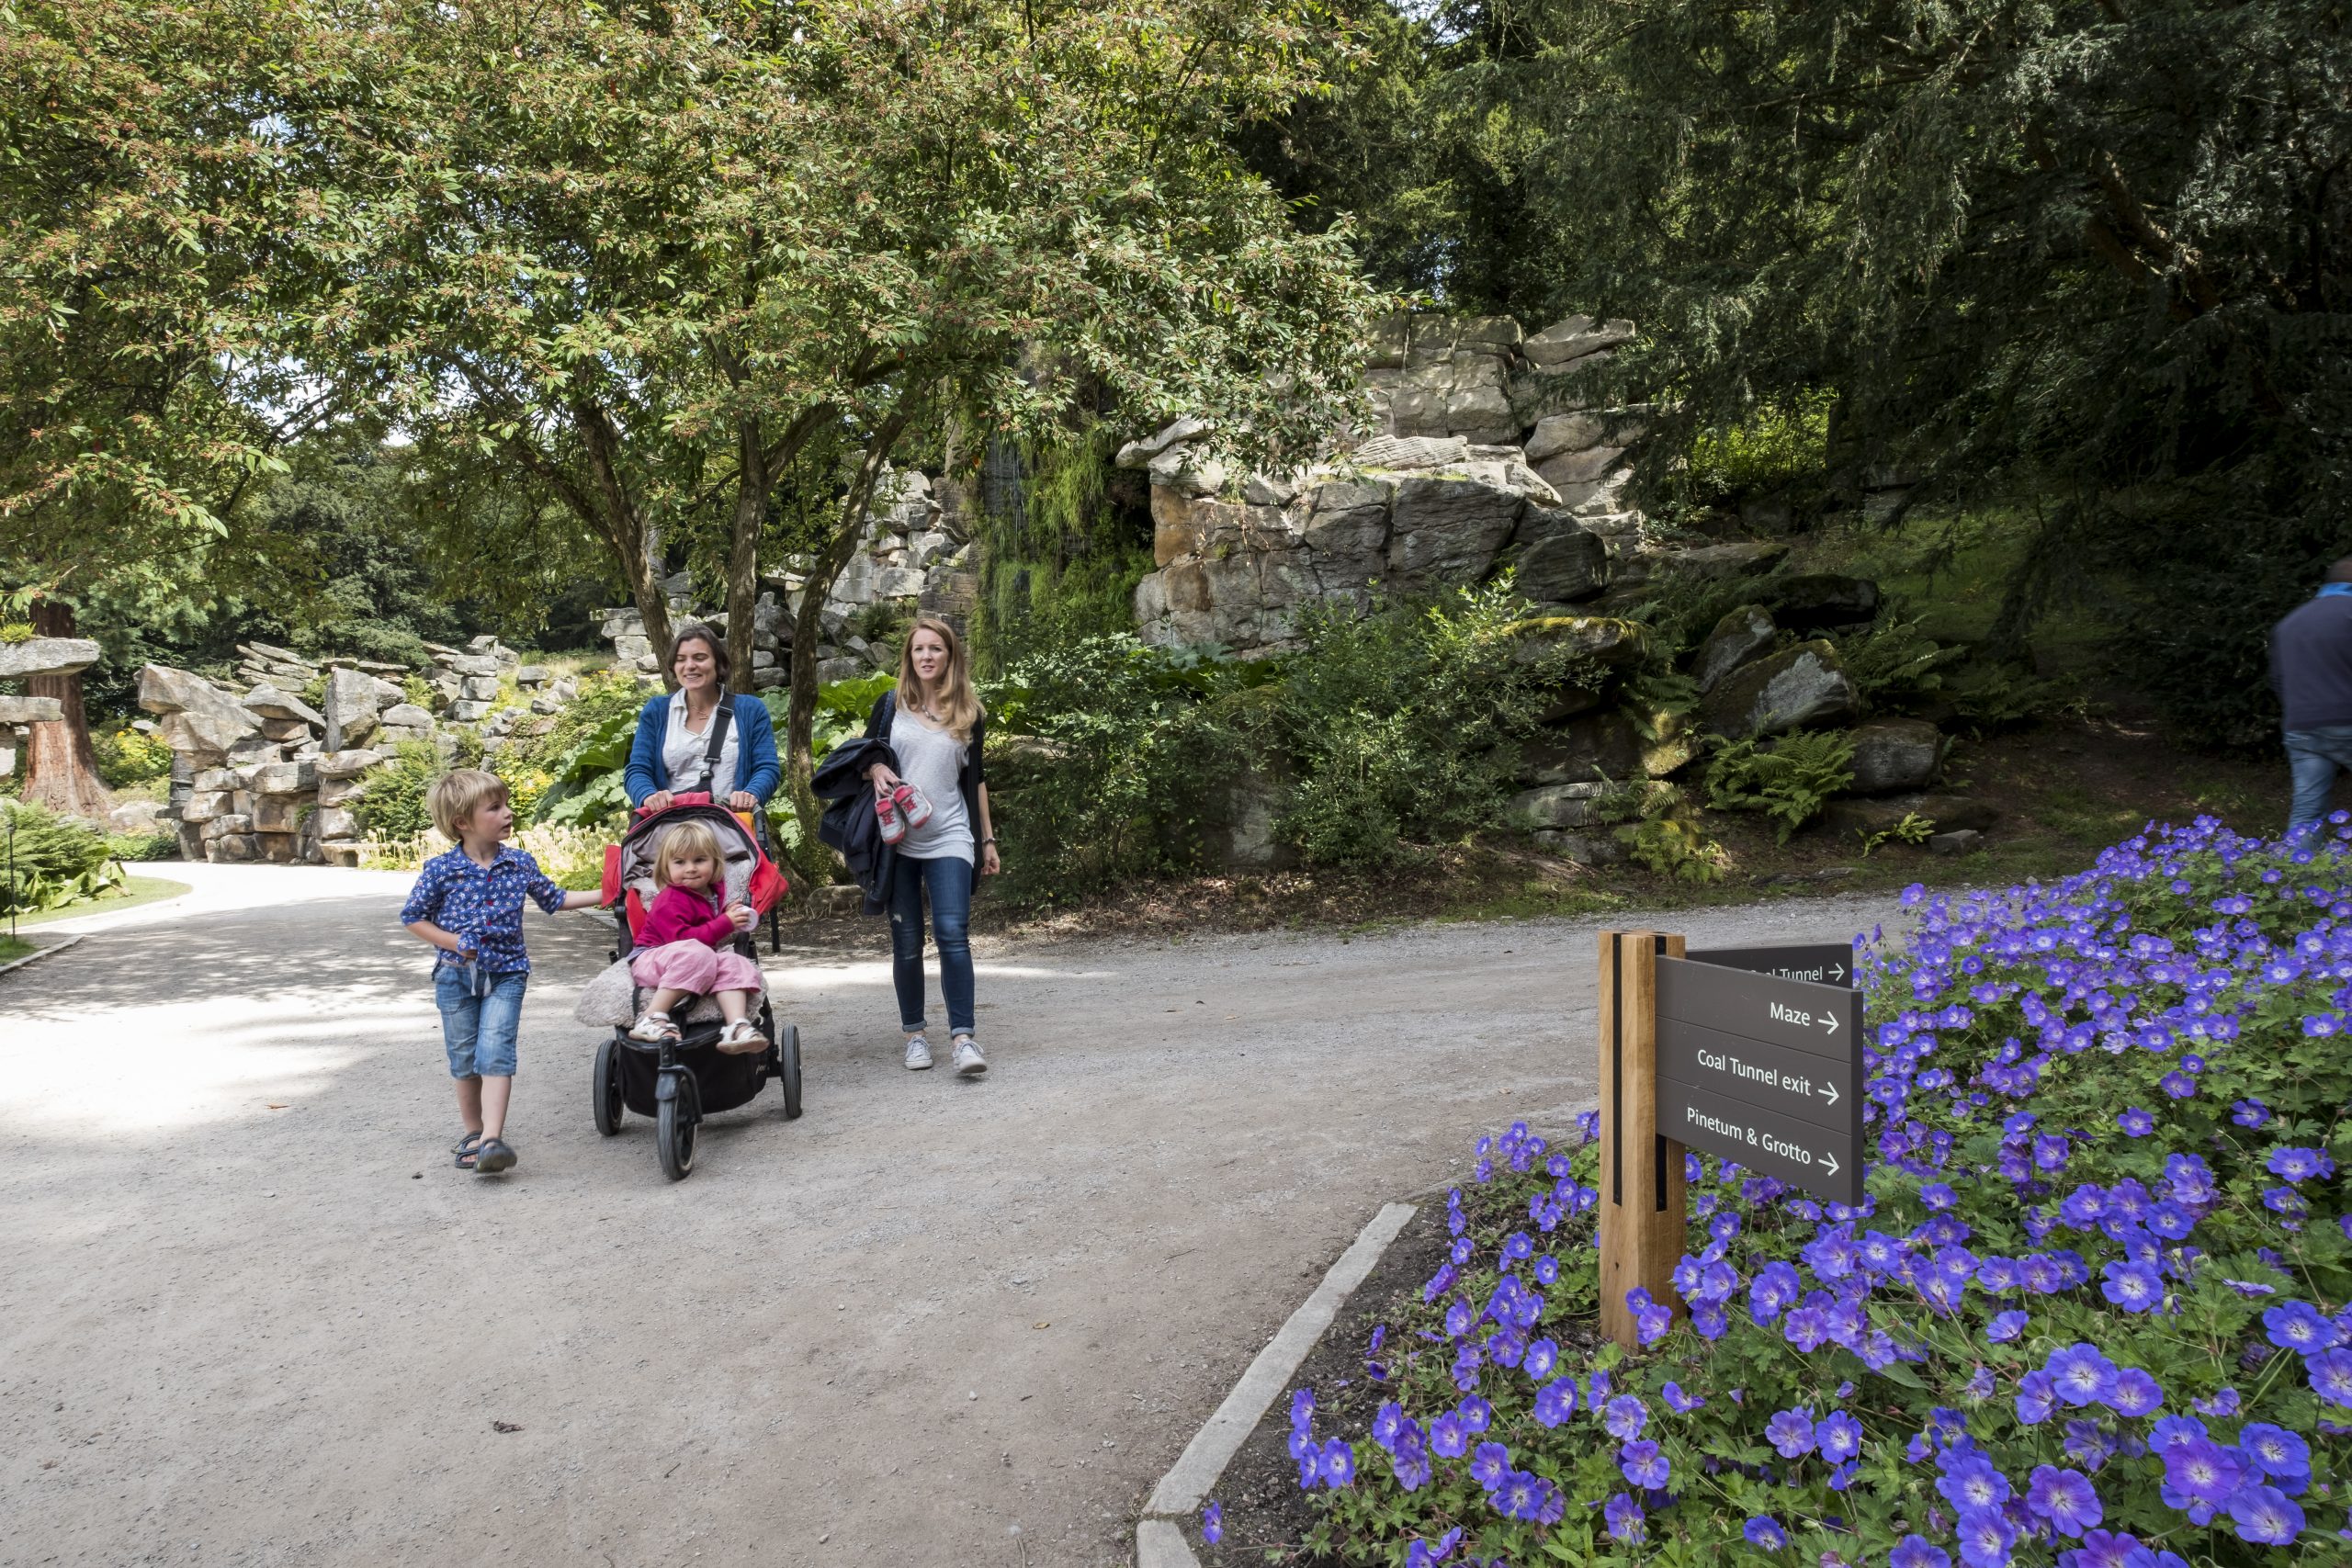 Outdoor view of family at Chatsworth enjoying the gardens (image features ABG Design signage in the foreground.